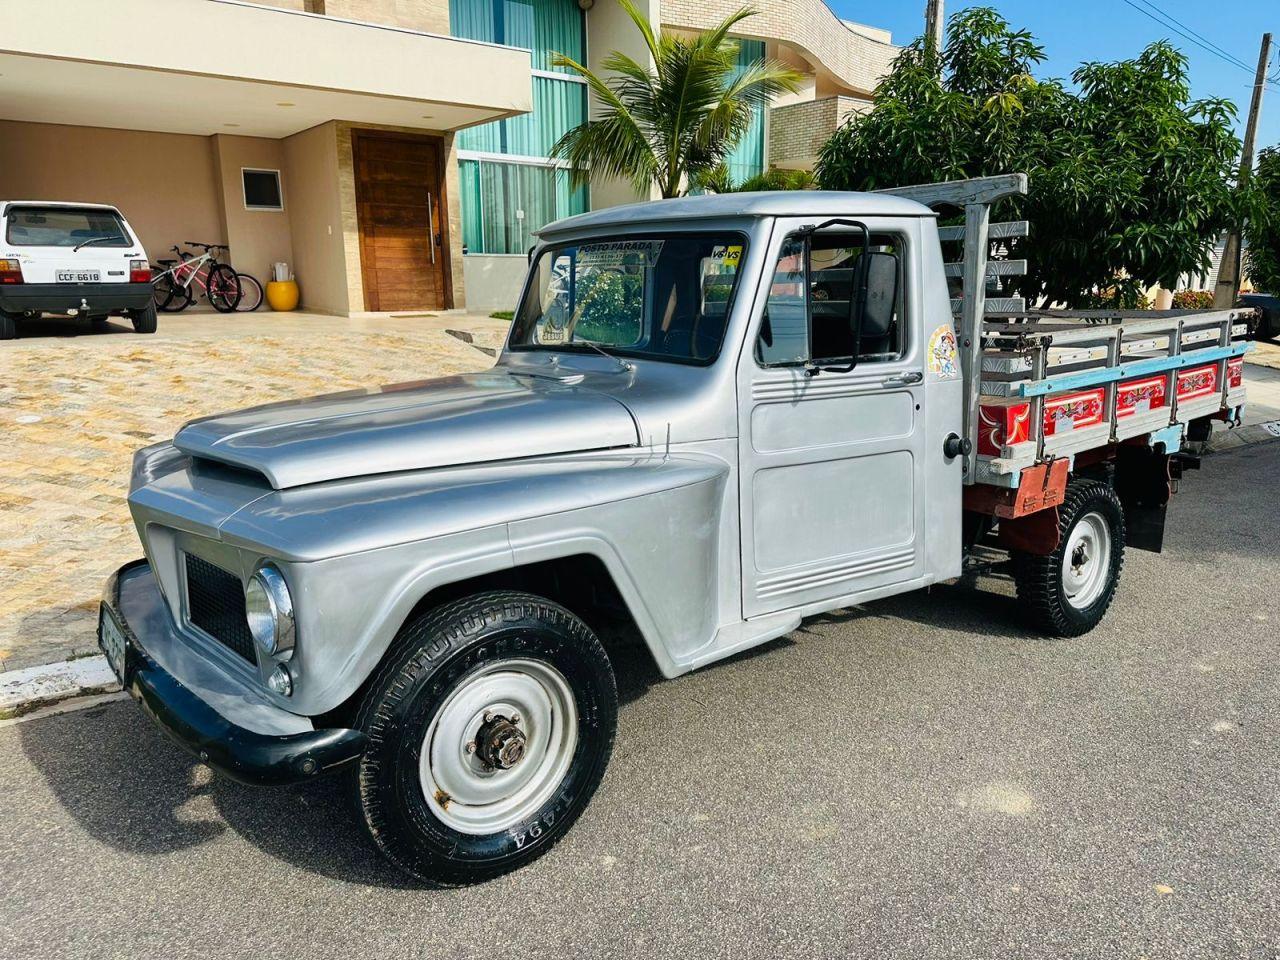 Willys Overland jeep 2.6 12 V 6 Cilindros 1965